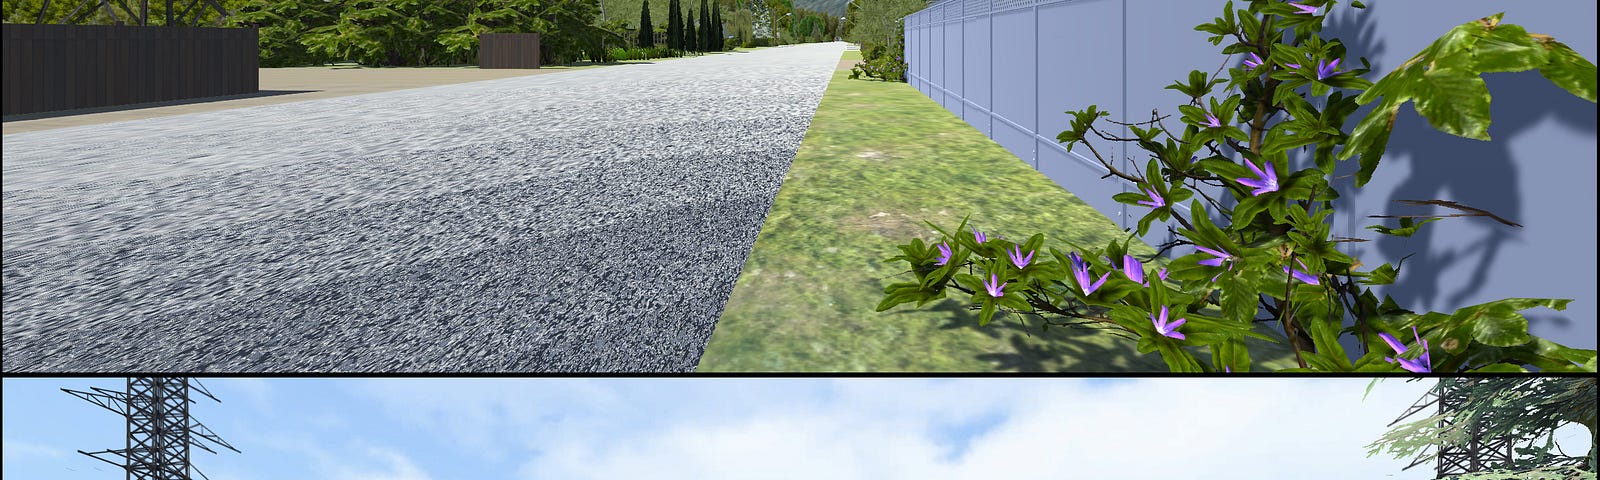 Two screen shots of computer-generated landscape showing a road and mountains. One shot shows a fenced residential area and the other shows a low-rise apartment building.